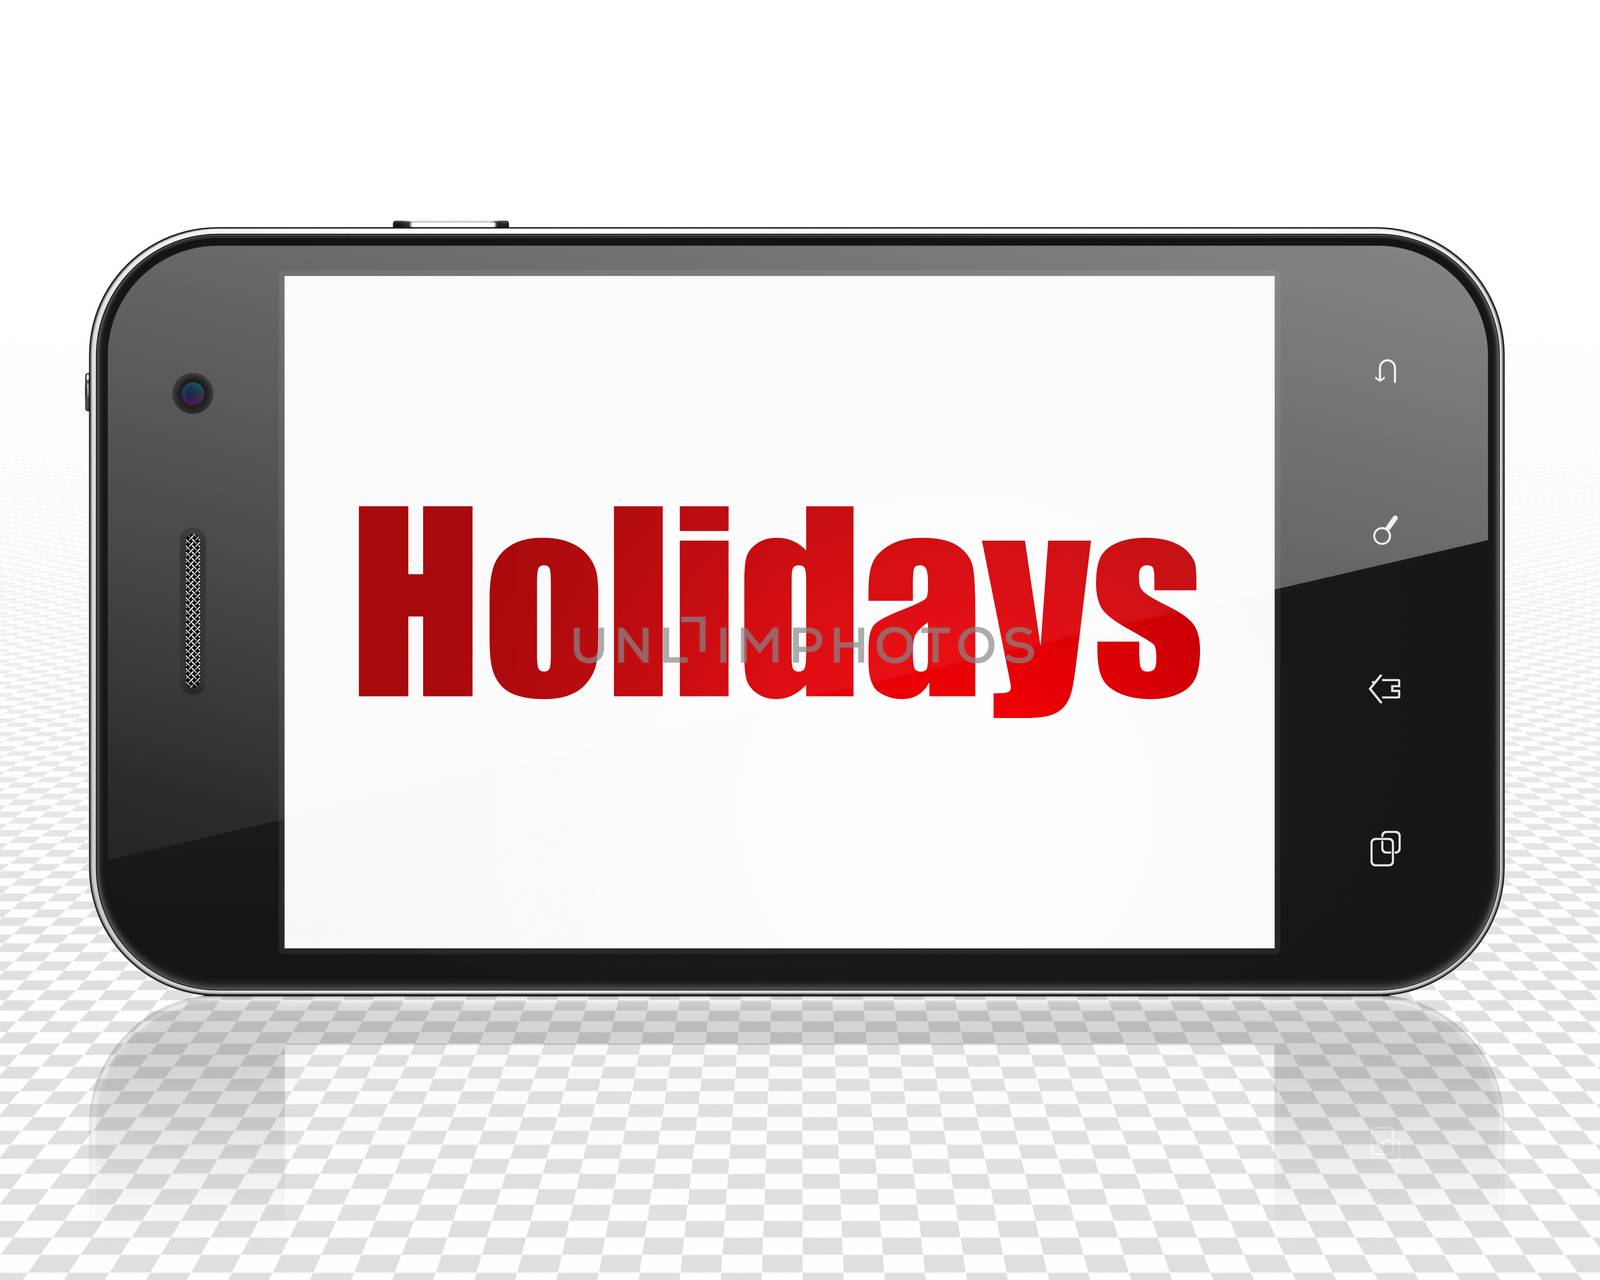 Holiday concept: Smartphone with red text Holidays on display, 3D rendering